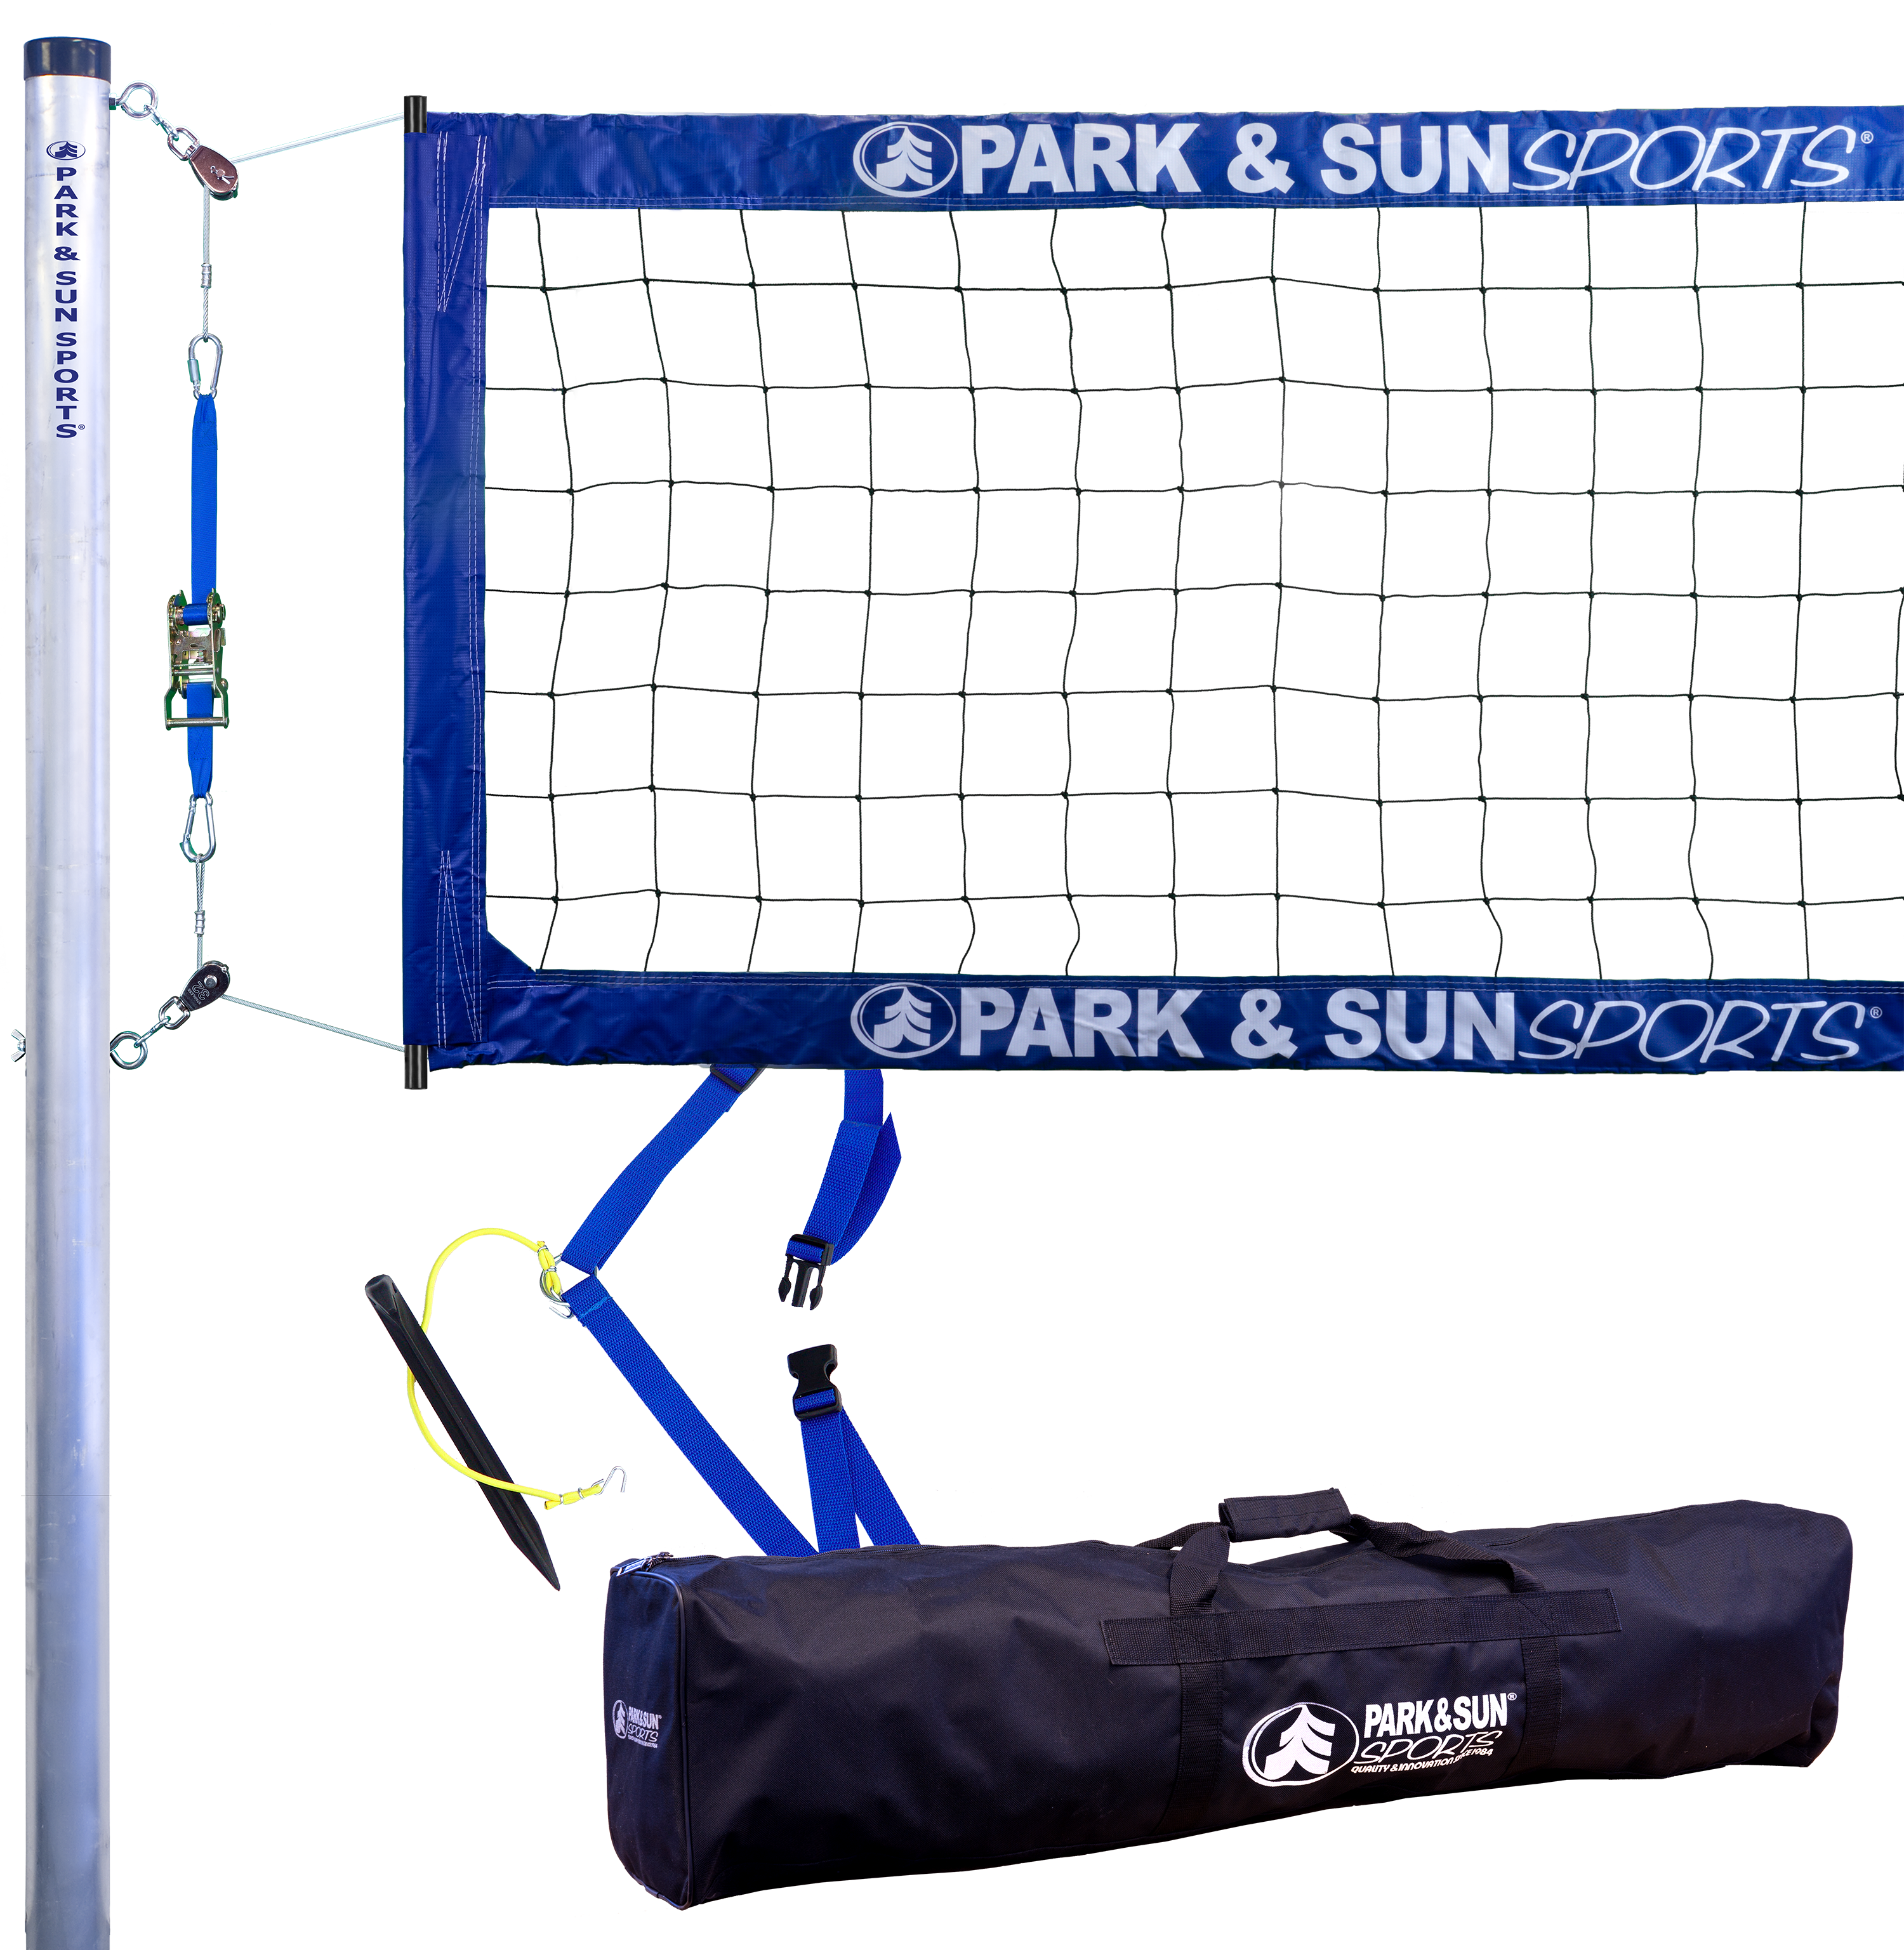 New Park & Sun Spectrum Classic Professional Level Volleyball Net System 